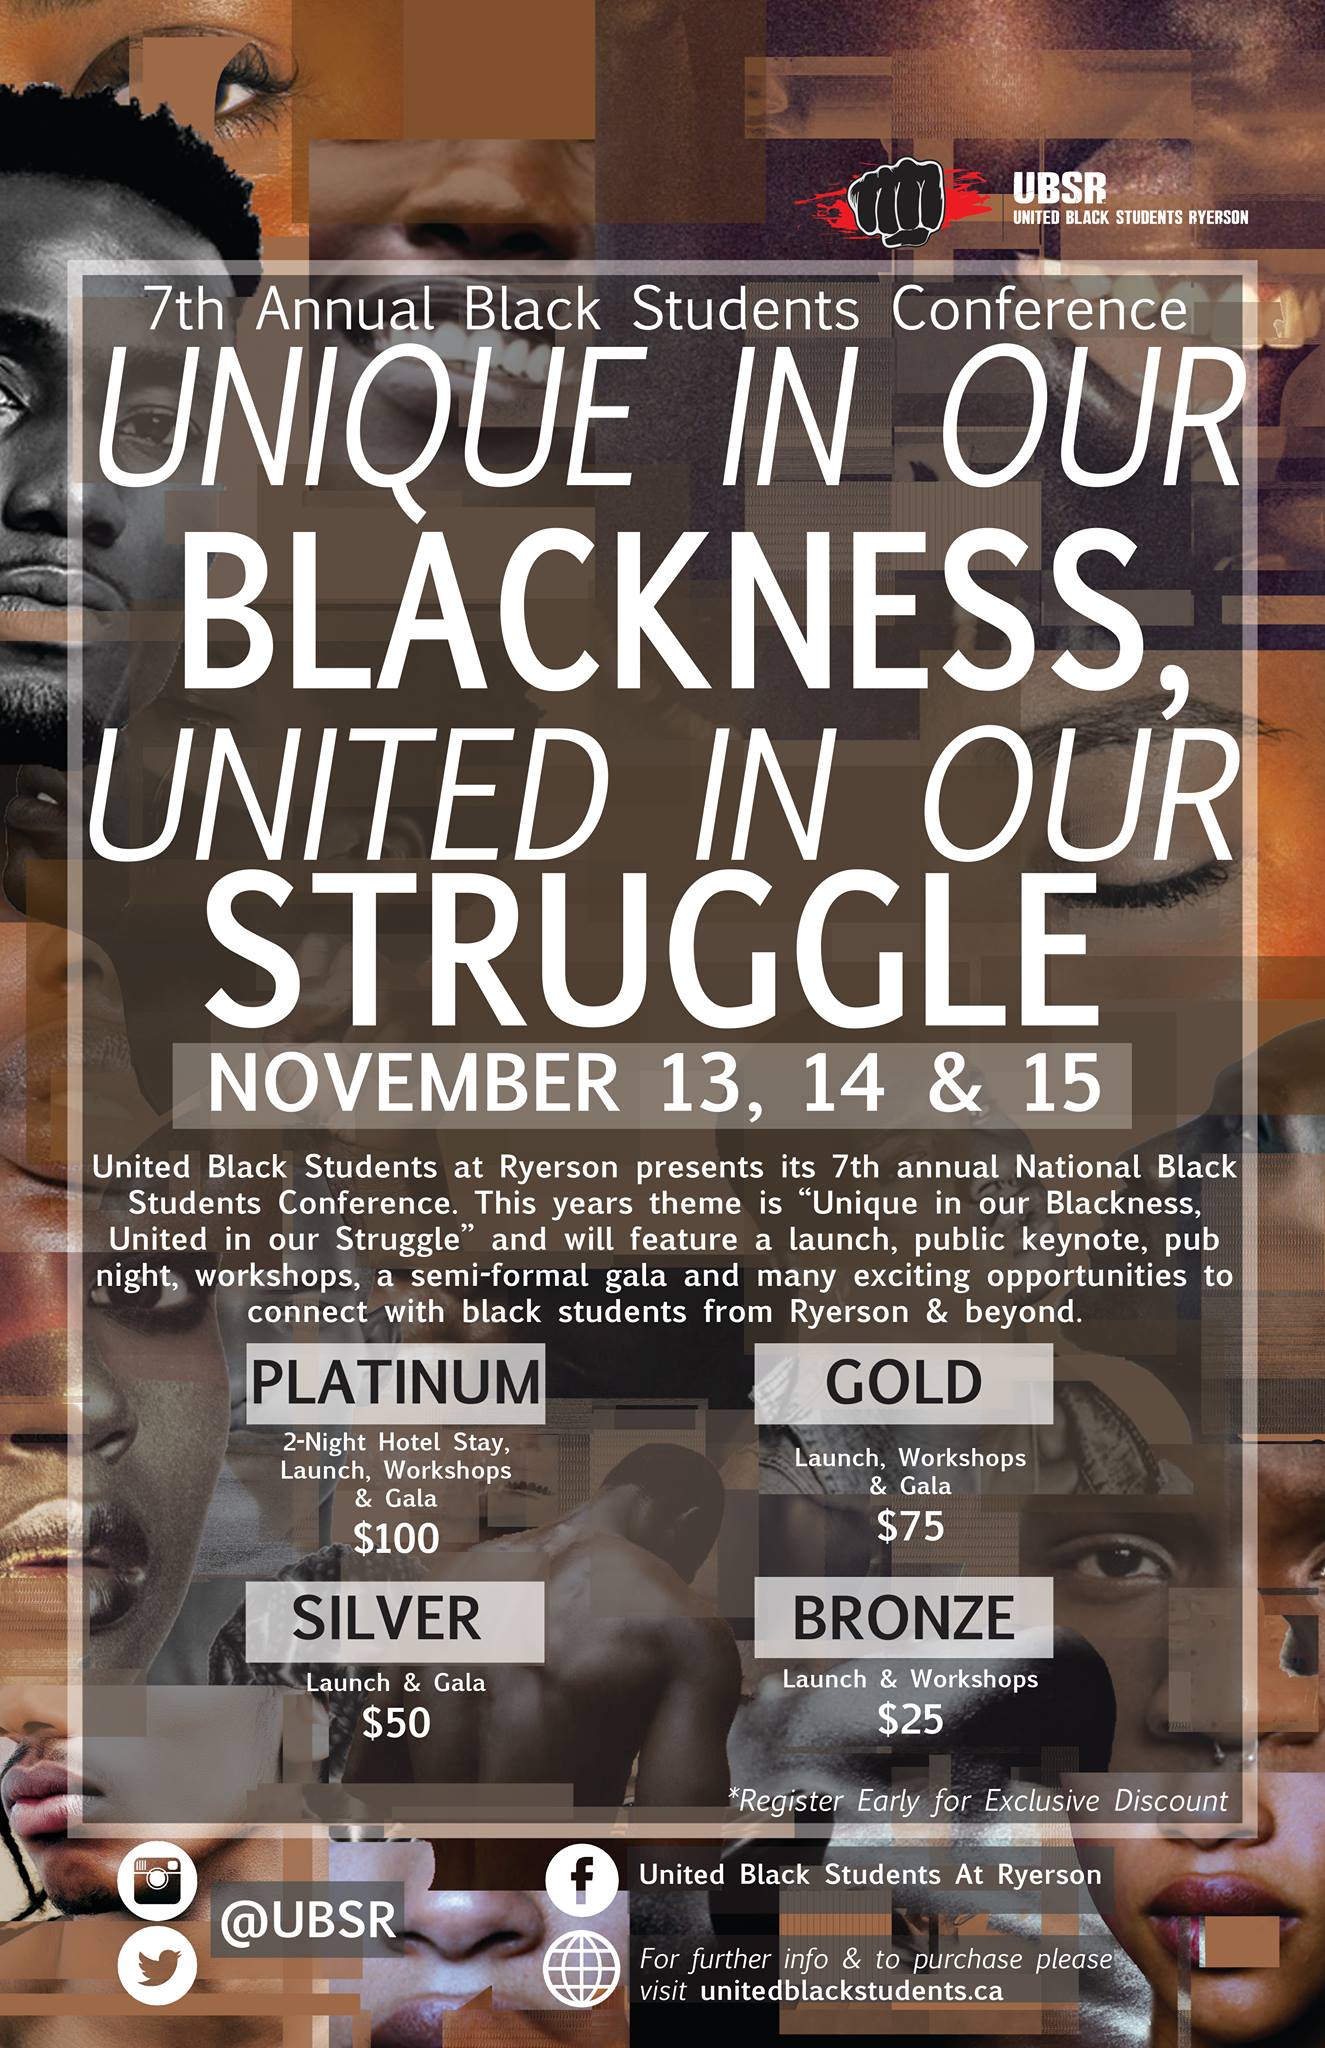 “Unique in our Blackness, United in our Struggle”